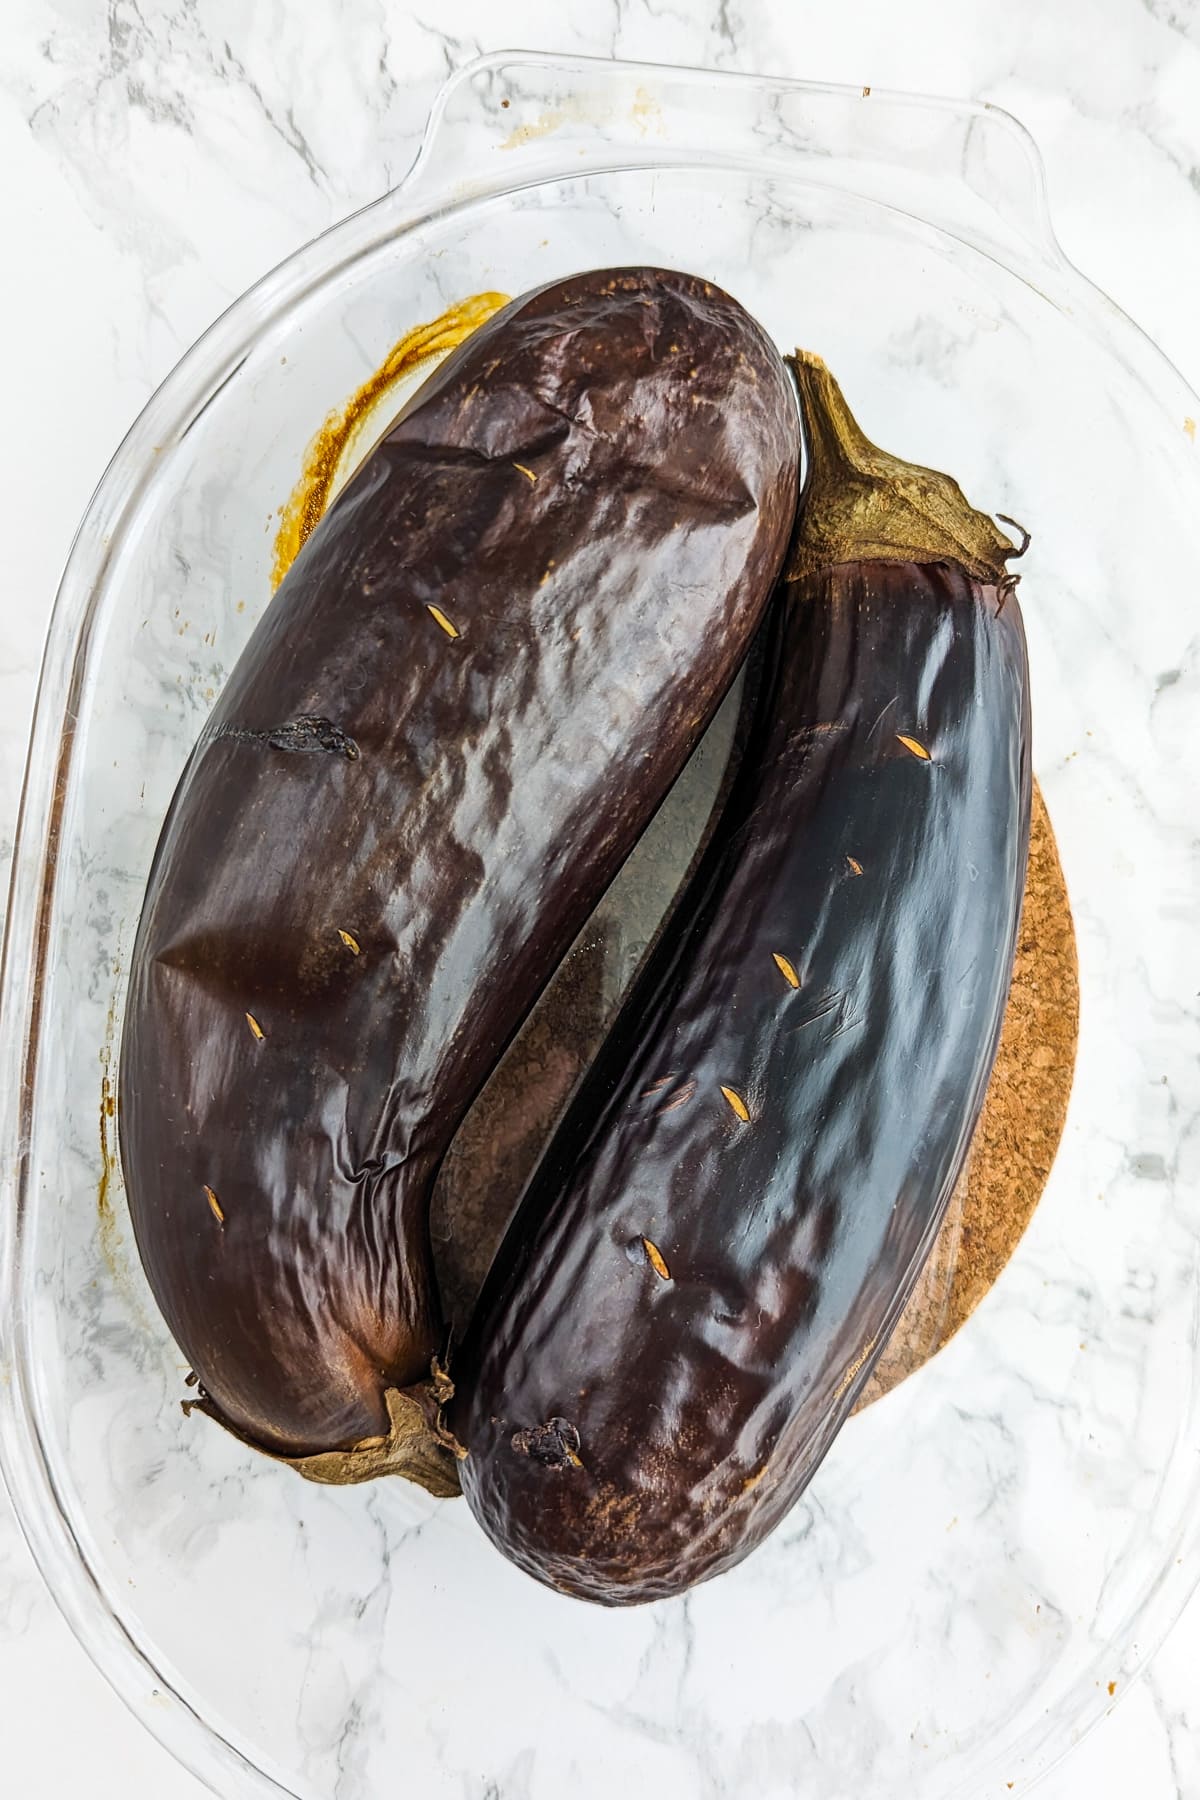 Top view of 2 baked eggplants sitting in a transparent baking dish.